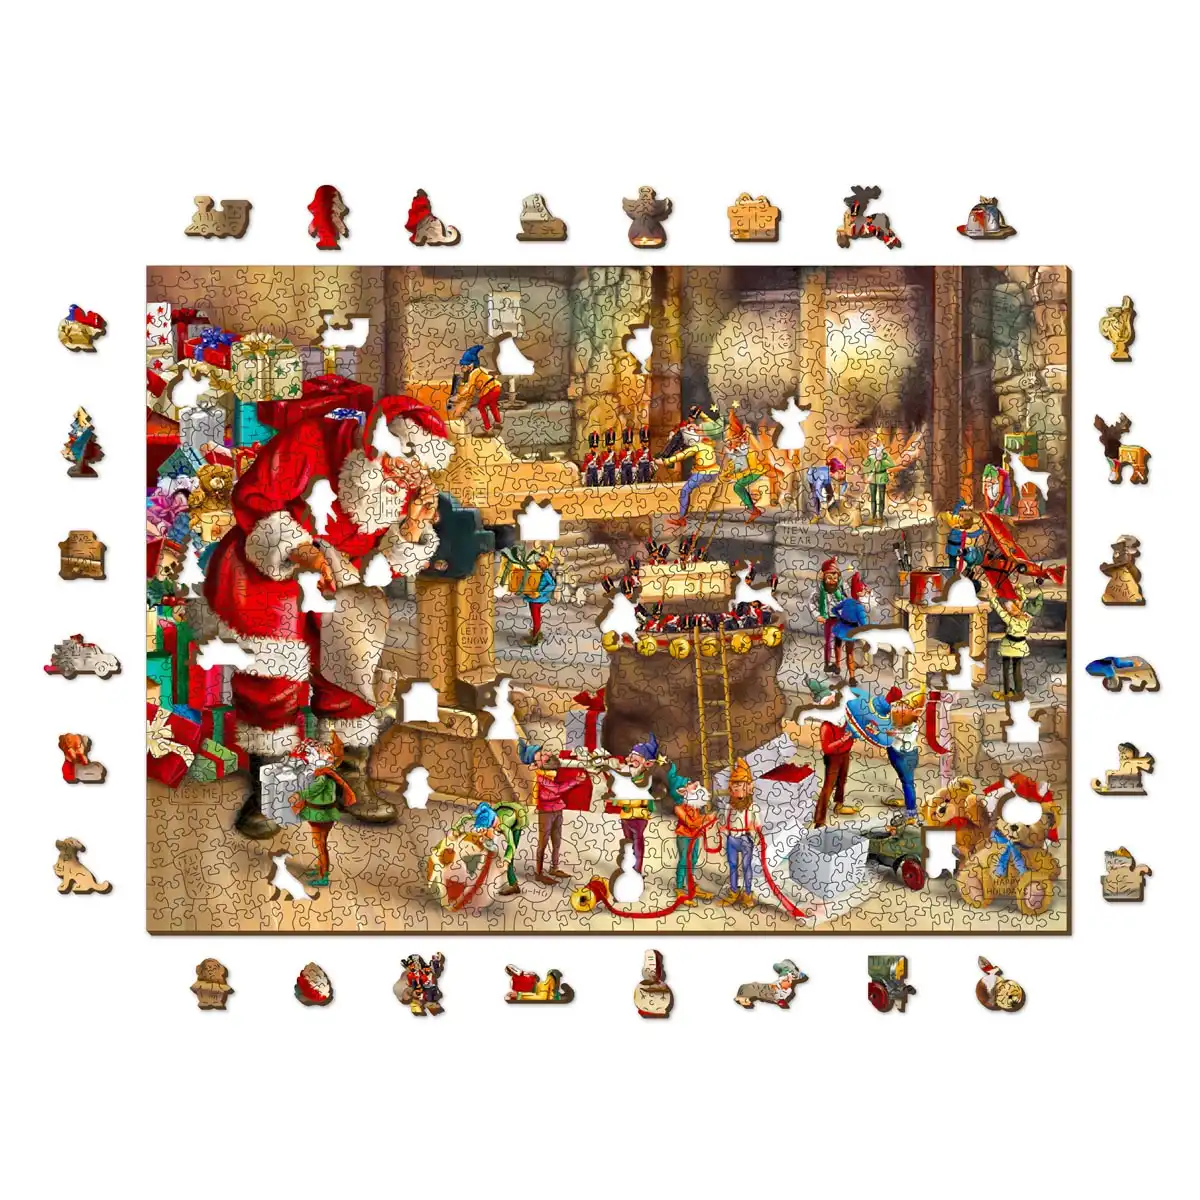 https://wooden.city/wp-content/uploads/2023/09/wooden-jigsaw-puzzle-for-adults-xm-1010-0049-xl-2.webp